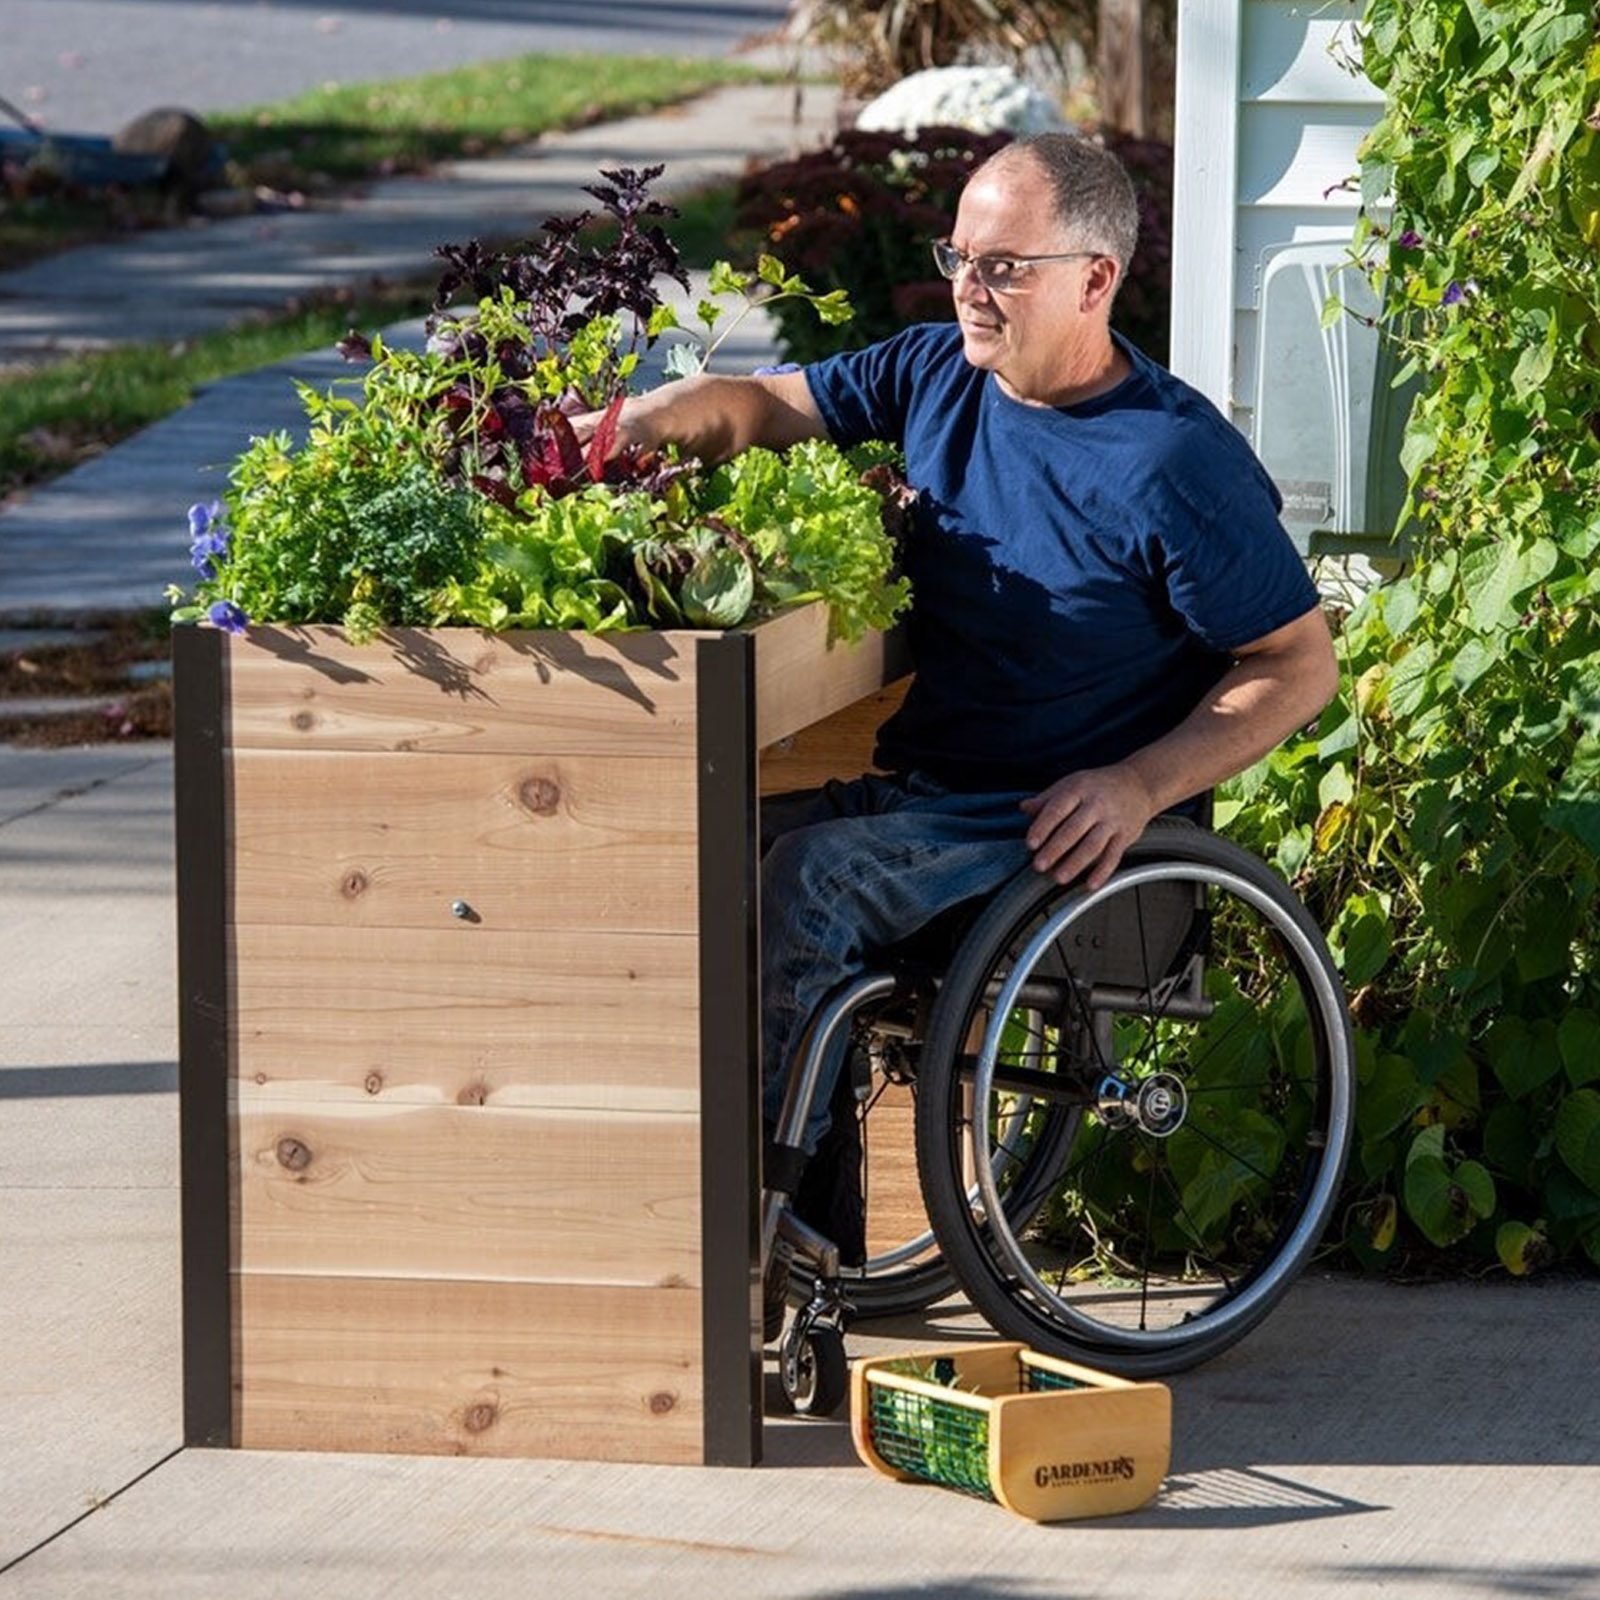 9 Adaptive Tools To Make Gardening With Disabilities Easier